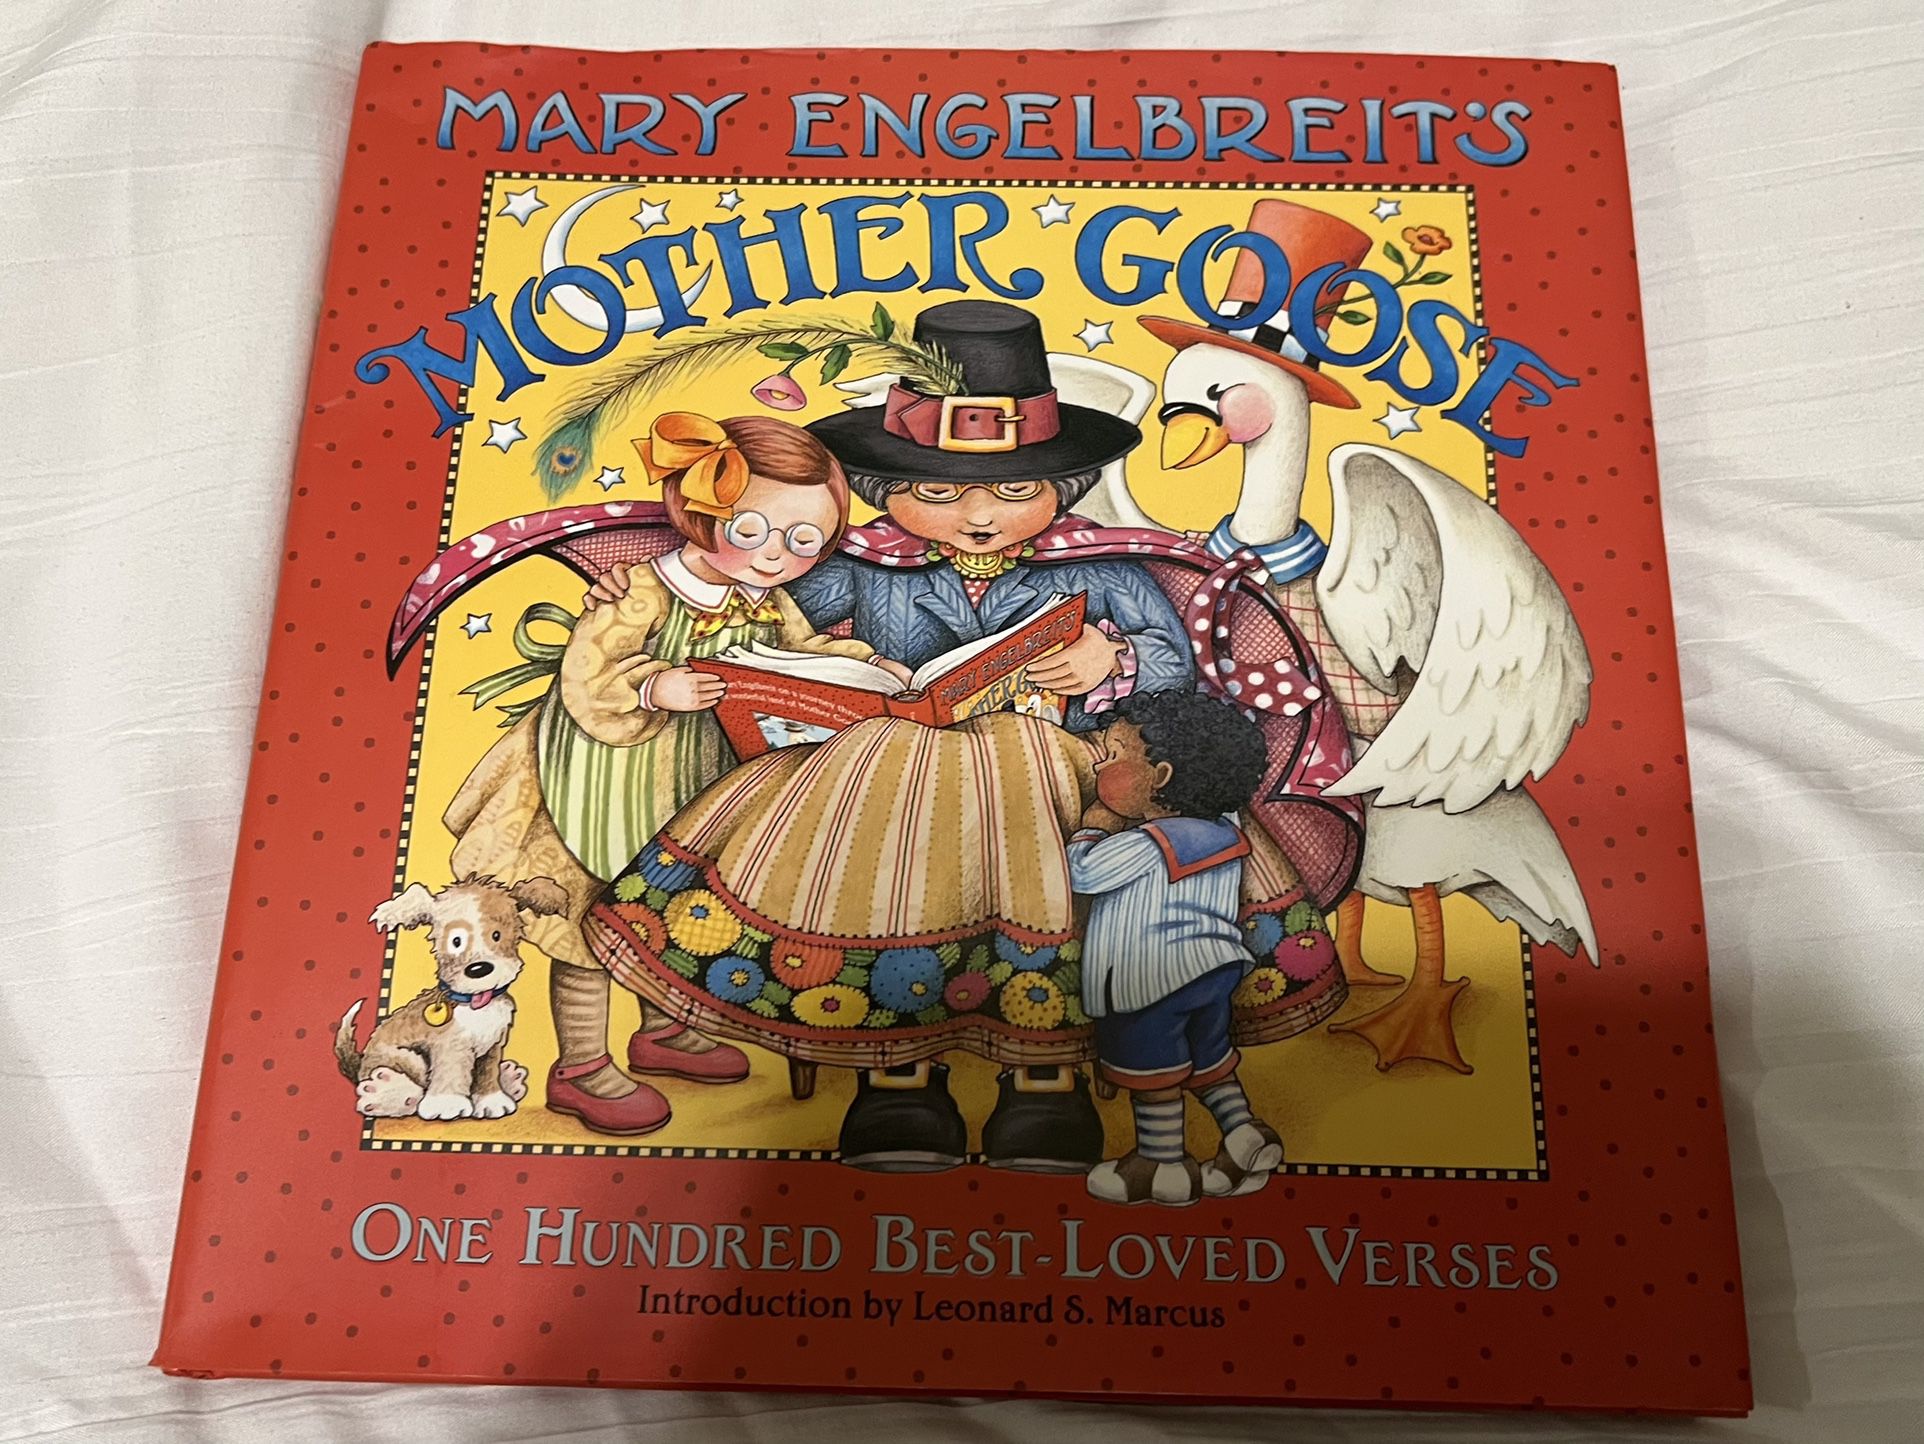 Mother Goose by Mary Engelbreit